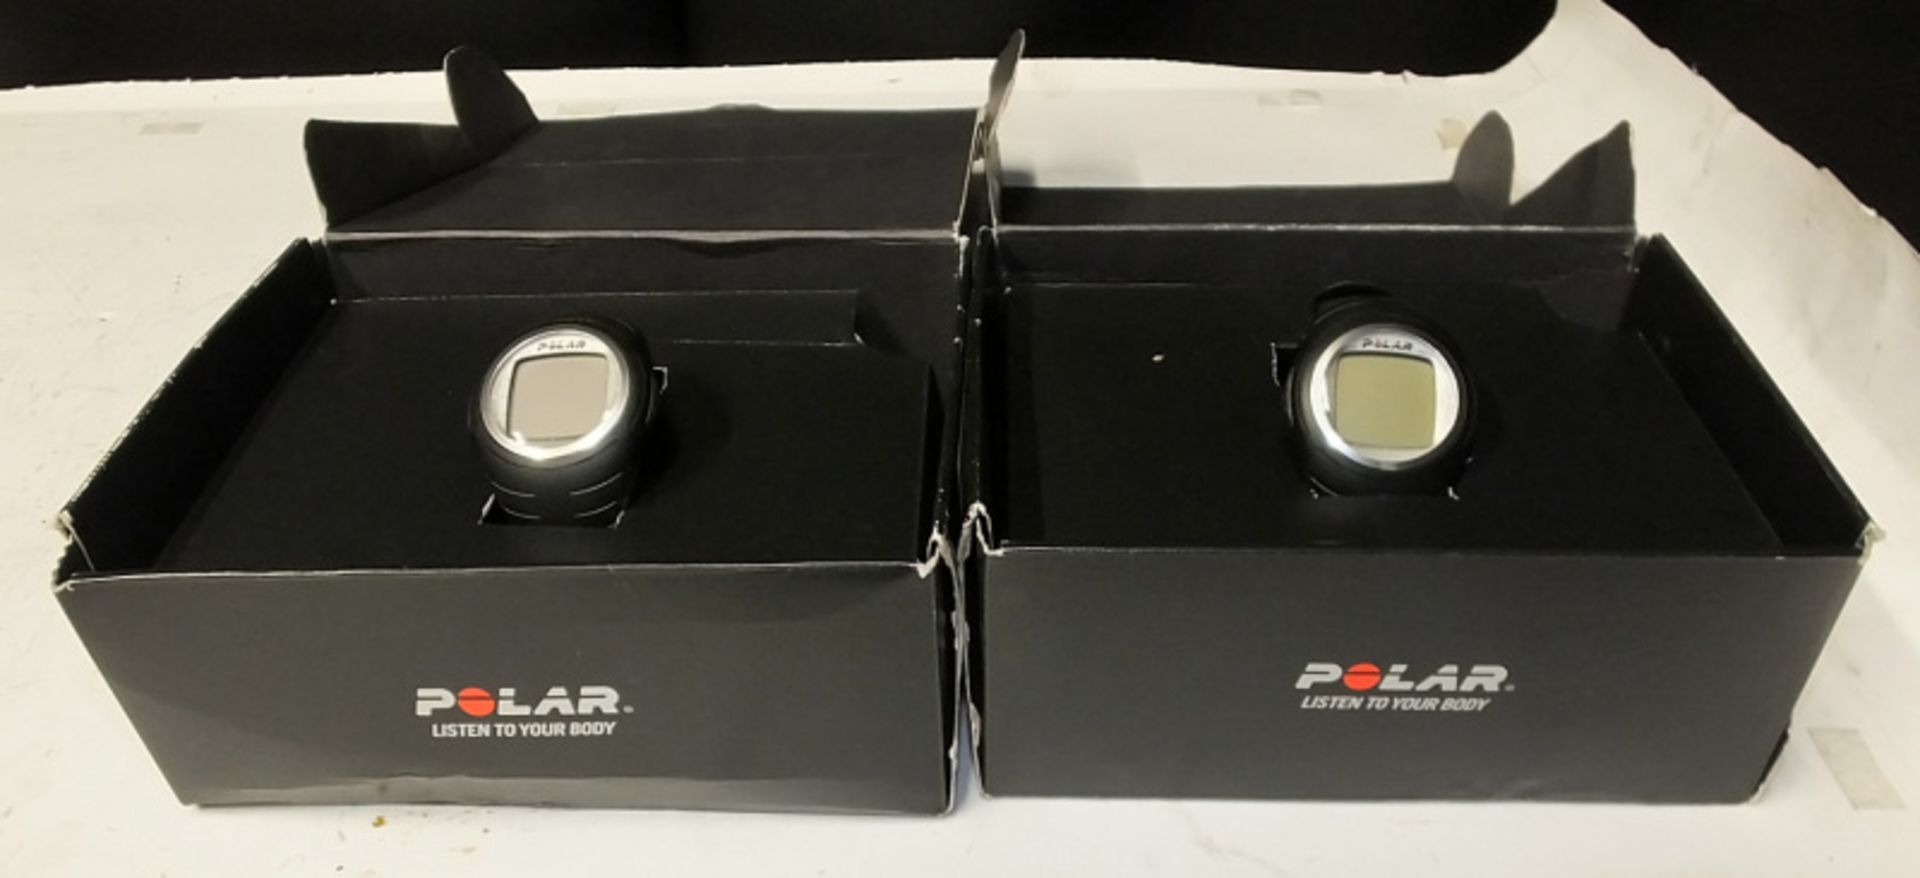 2x Polar F4 Fitness Heart Rate Monitors with Polar Heart Rate Chest Sensors